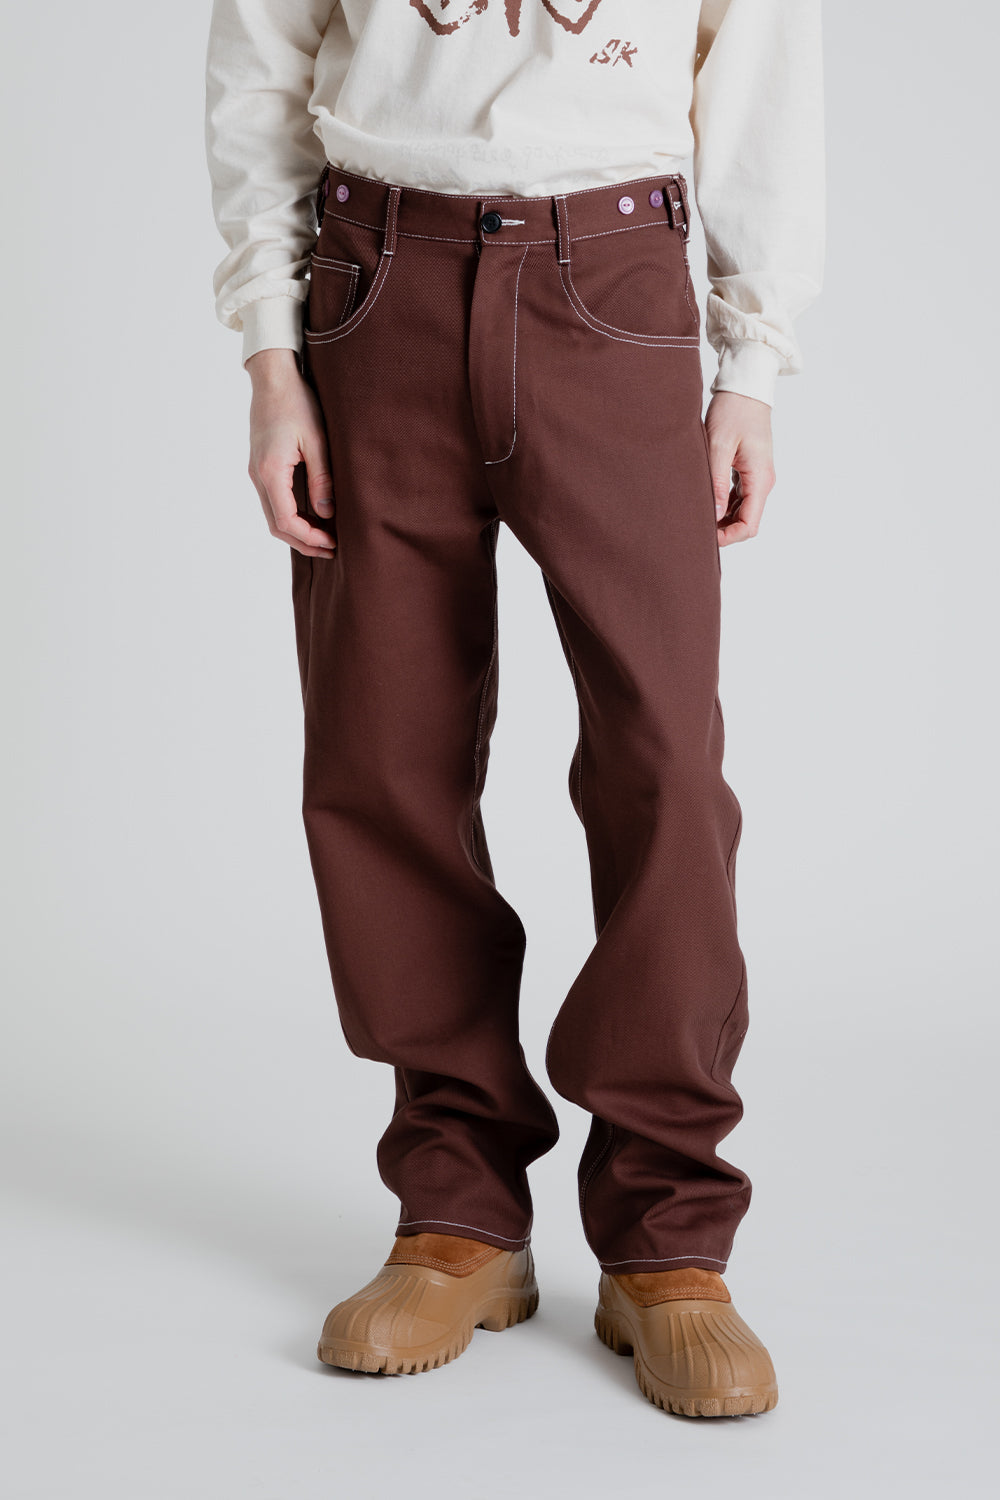 Ranch Pant - Brown Cotton Twill